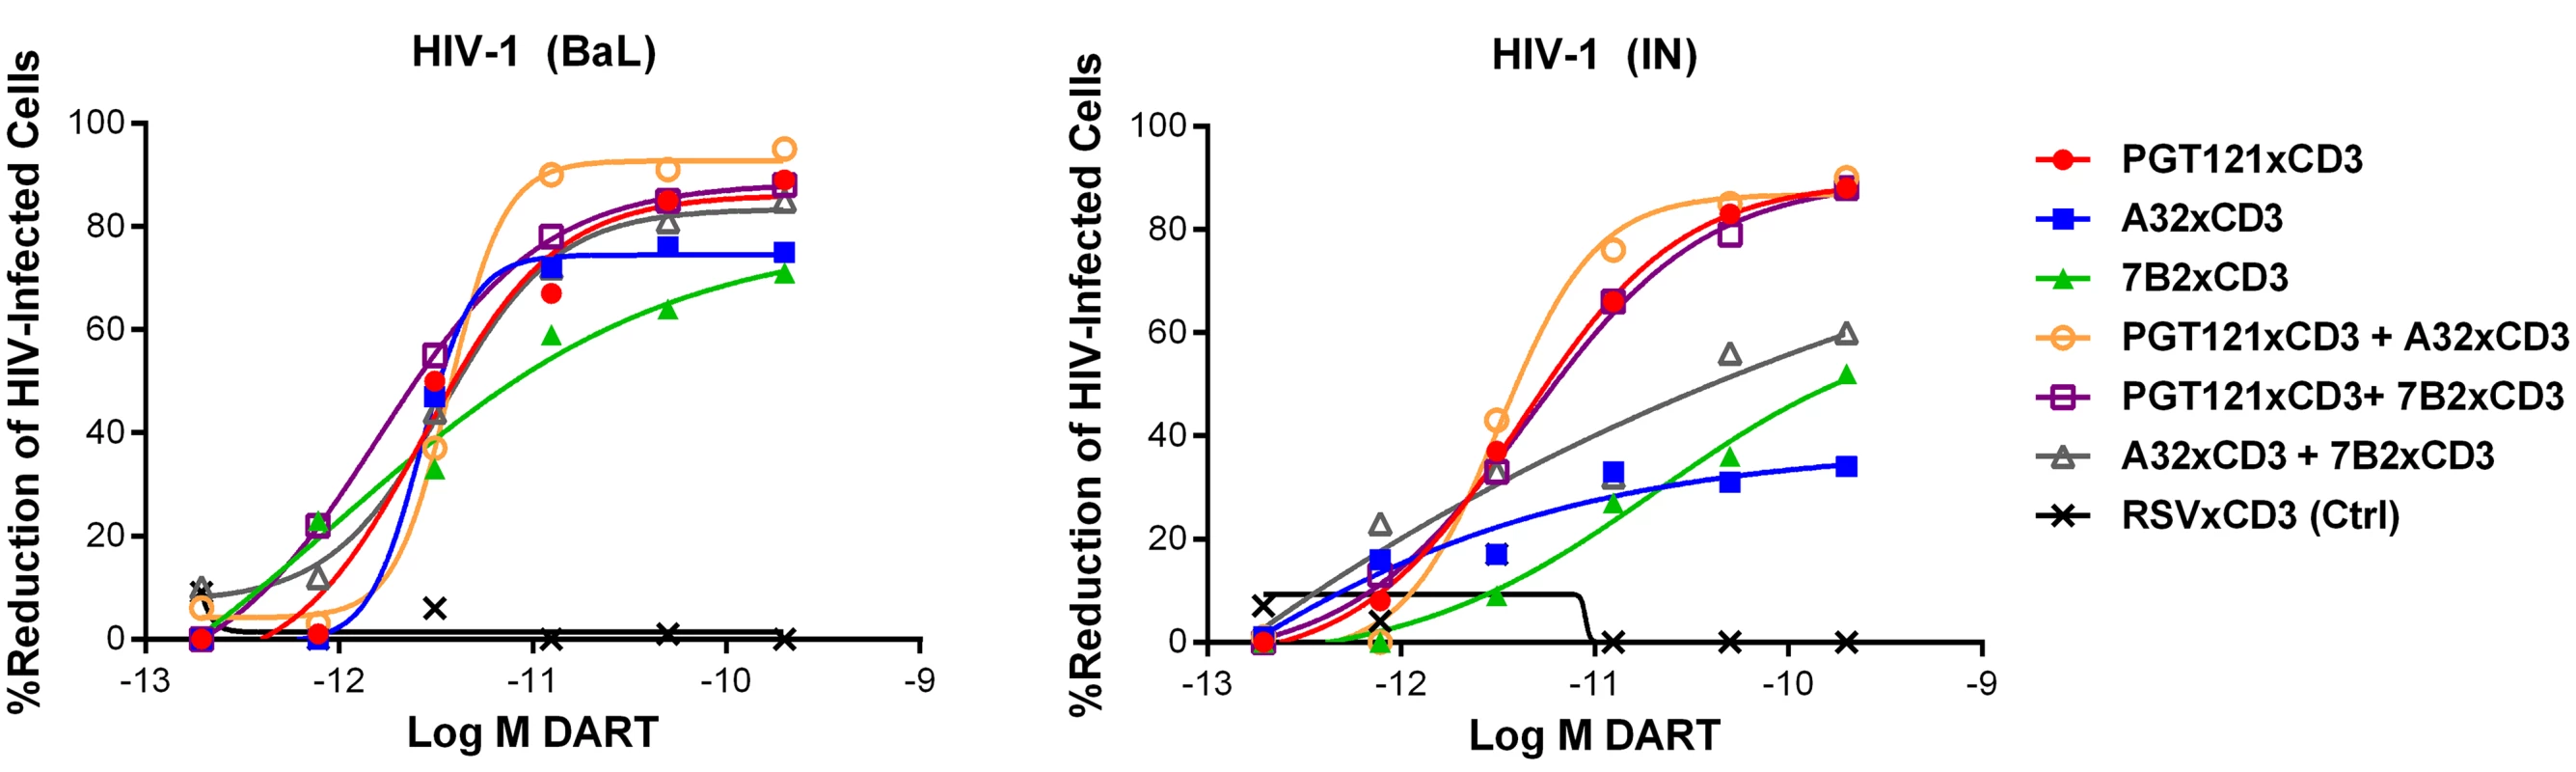 Combinations of HIVxCD3 DARTs induce CD8 T cell-dependent cytolysis of CD4 T cells infected with HIV-1 in vitro.